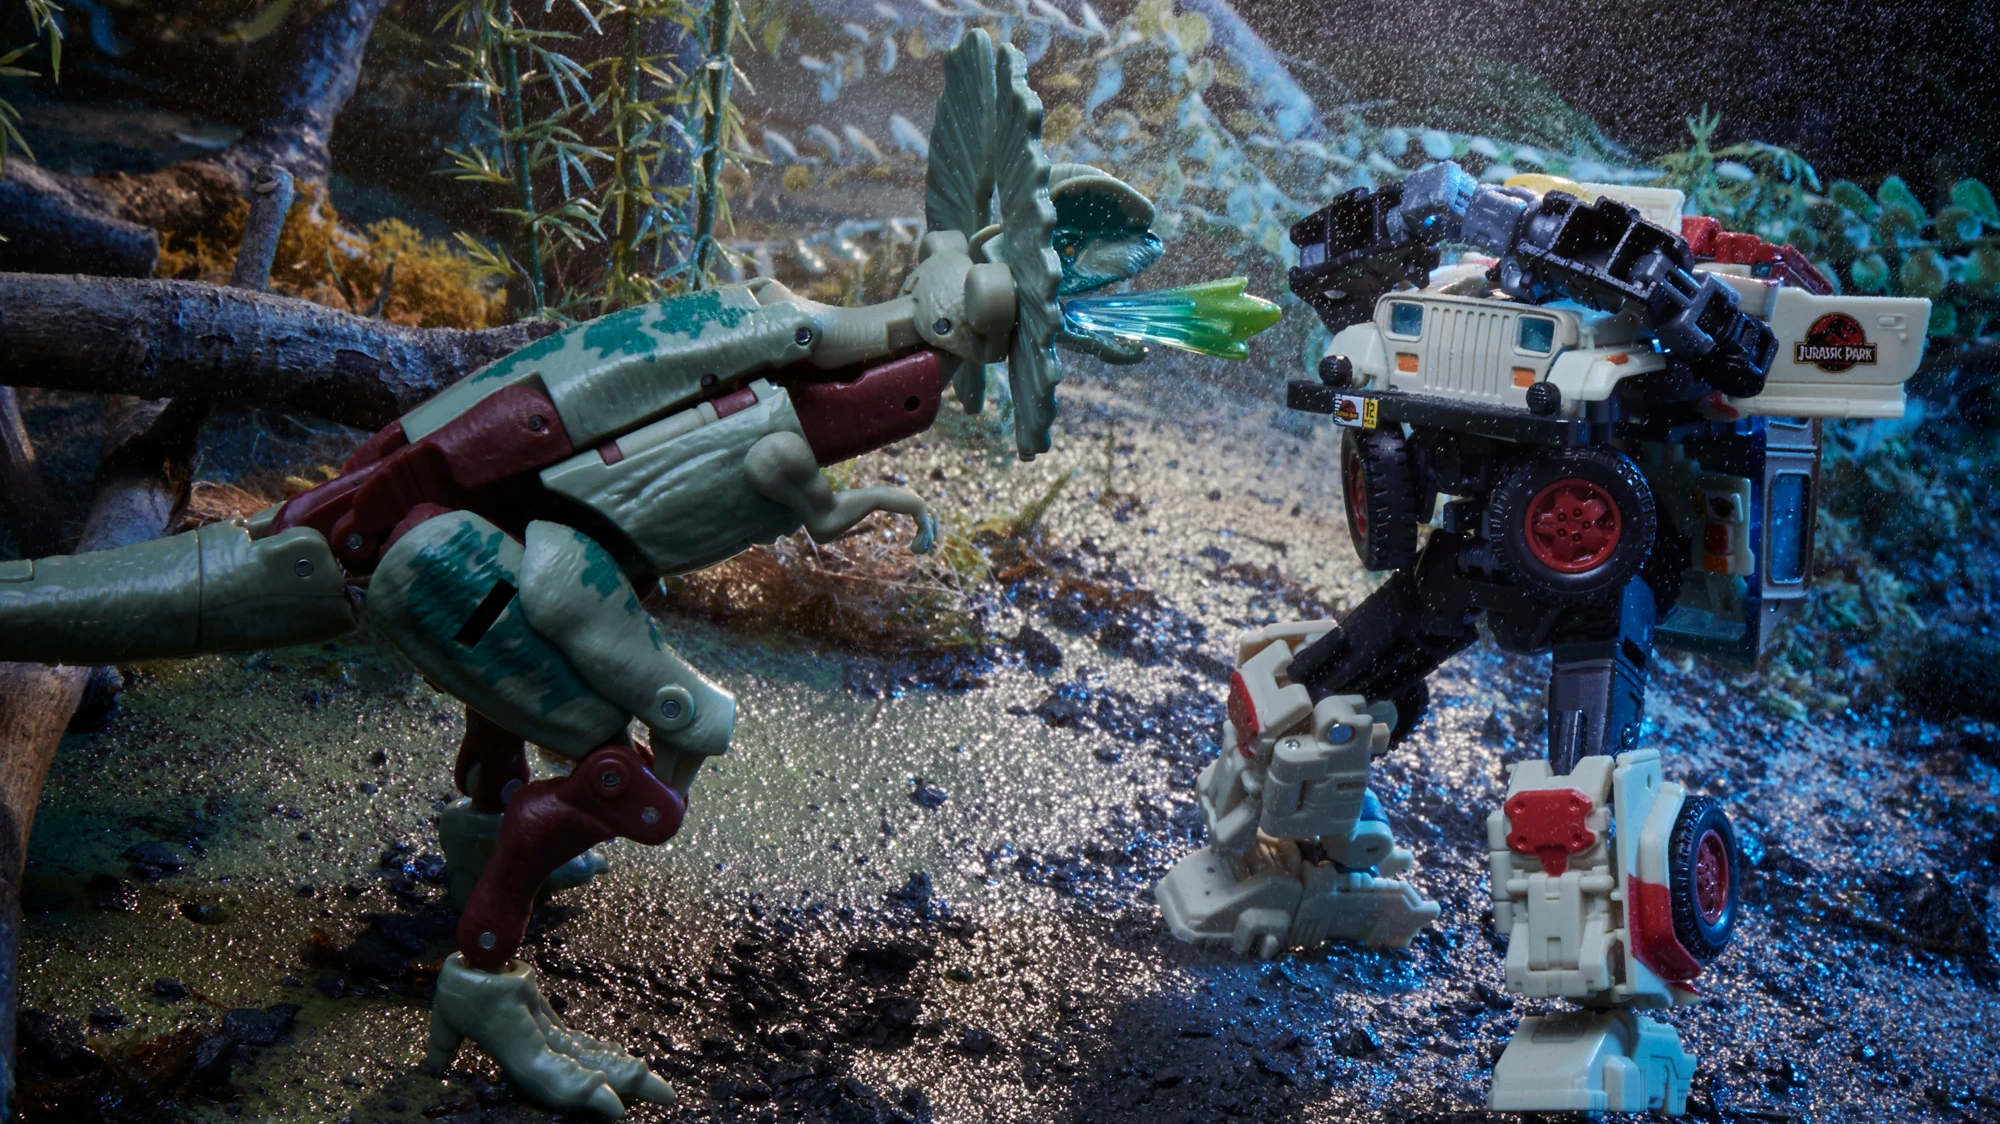 Transformers and Jurassic Park crossover set